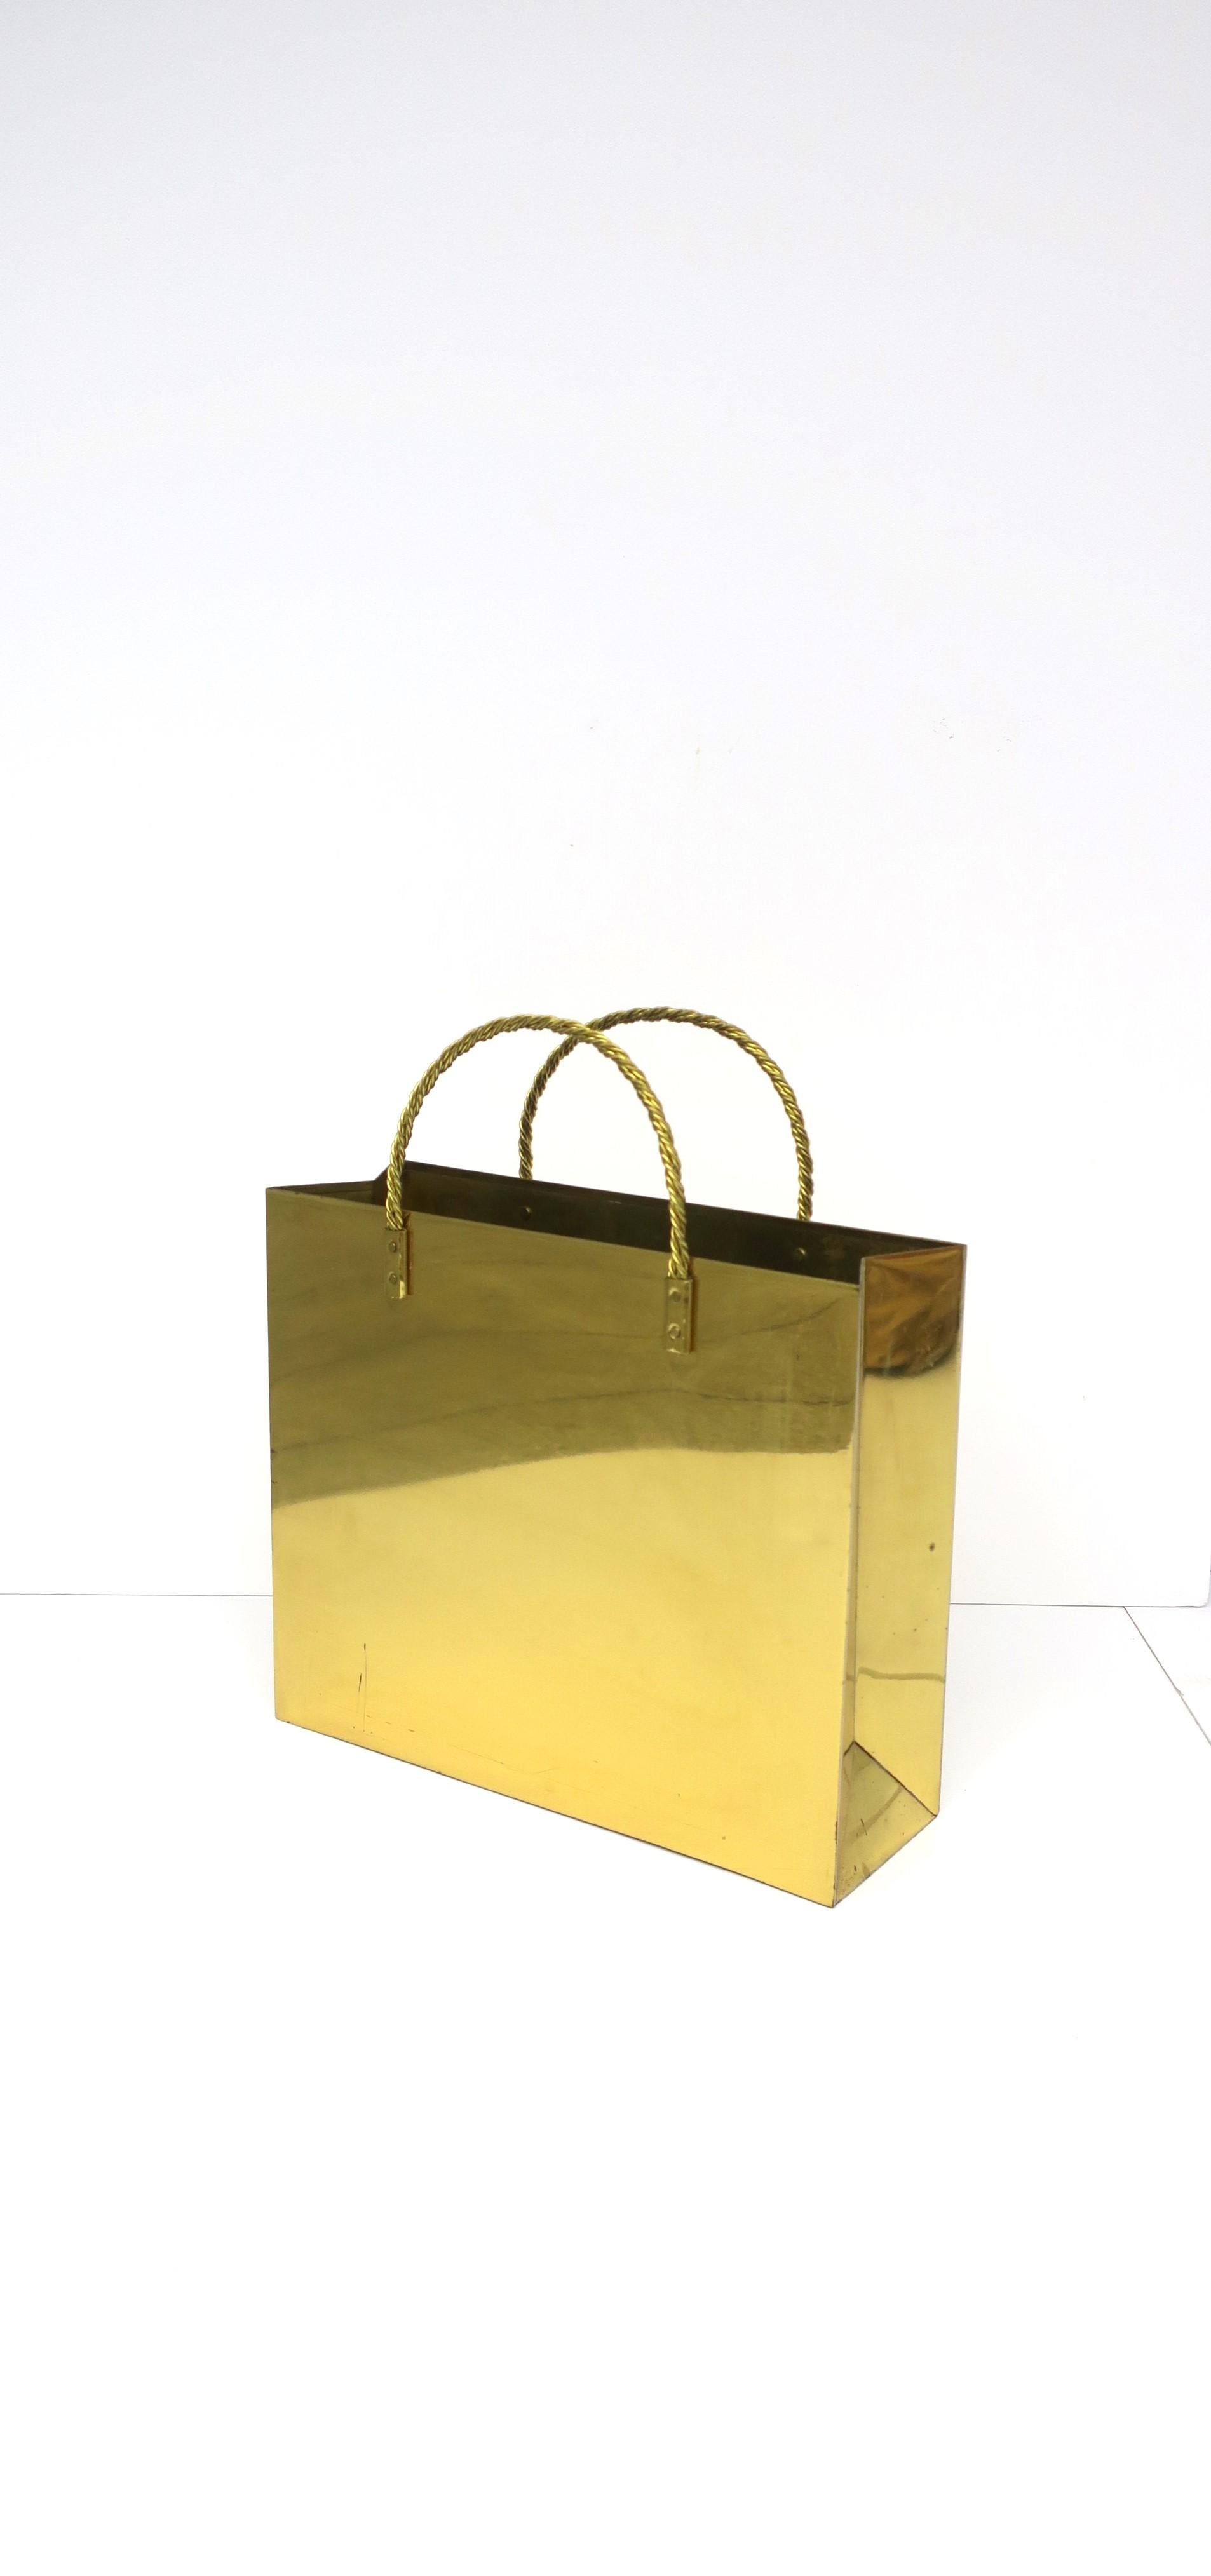 An Italian solid brass 'tote bag' magazine holder (or wastebasket), in the style of modern, in the style of Willy Rizzo, circa late-20th century, 1970s, Italy. This iconic 'tote bag' piece is solid lacquered brass (no polishing required), with brass